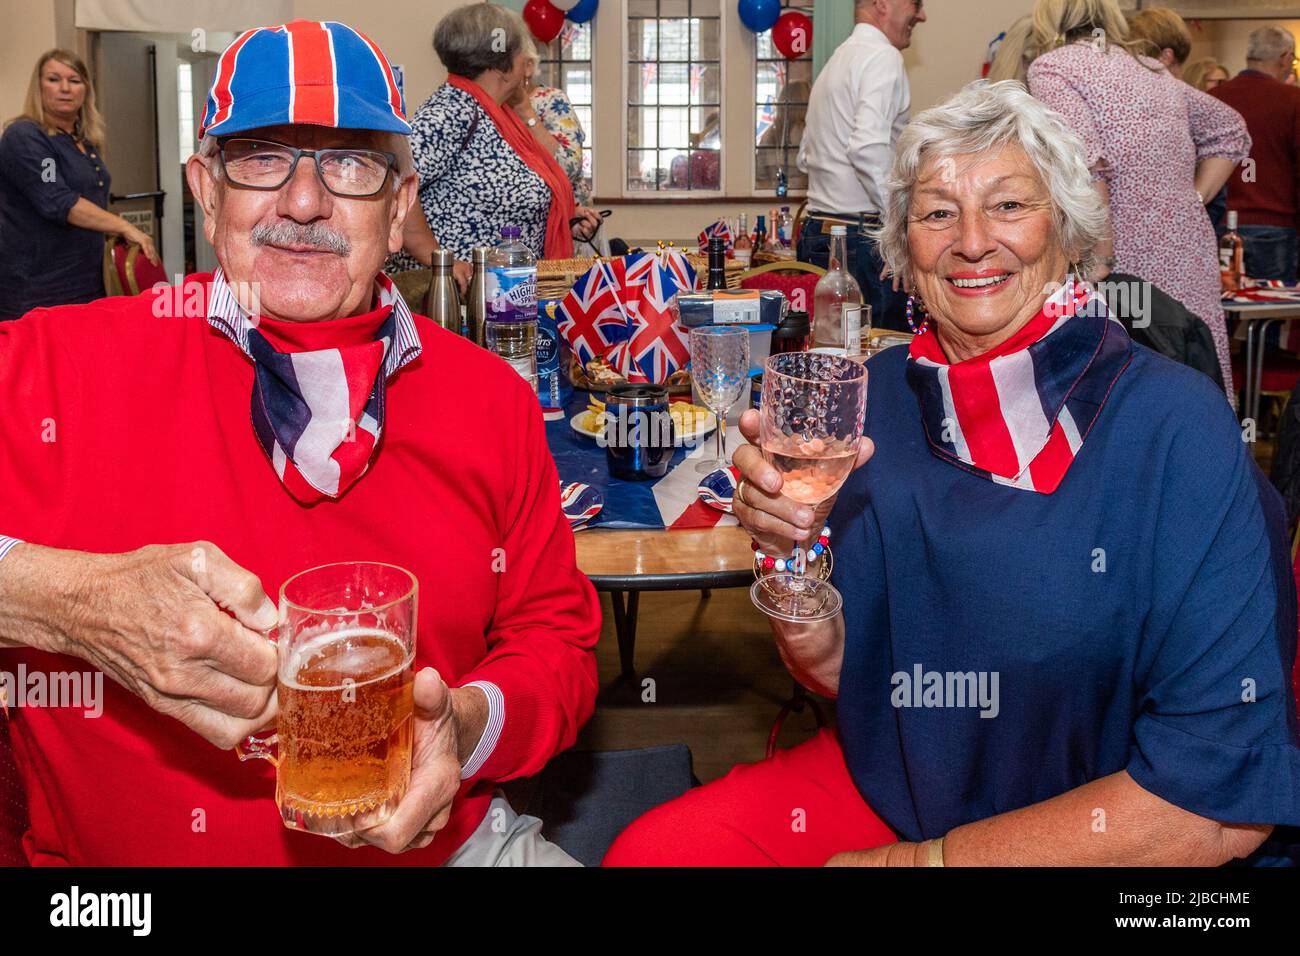 Clifford Chambers, Warwickshire, UK. 5th June, 2022. The picturesque village of Clifford Chambers held a Platinum Jubilee in its village hall today. Enjoying the celebration were Chris and Val Wilks from Clifford Chambers. Credit: AG News/Alamy Live News Stock Photo